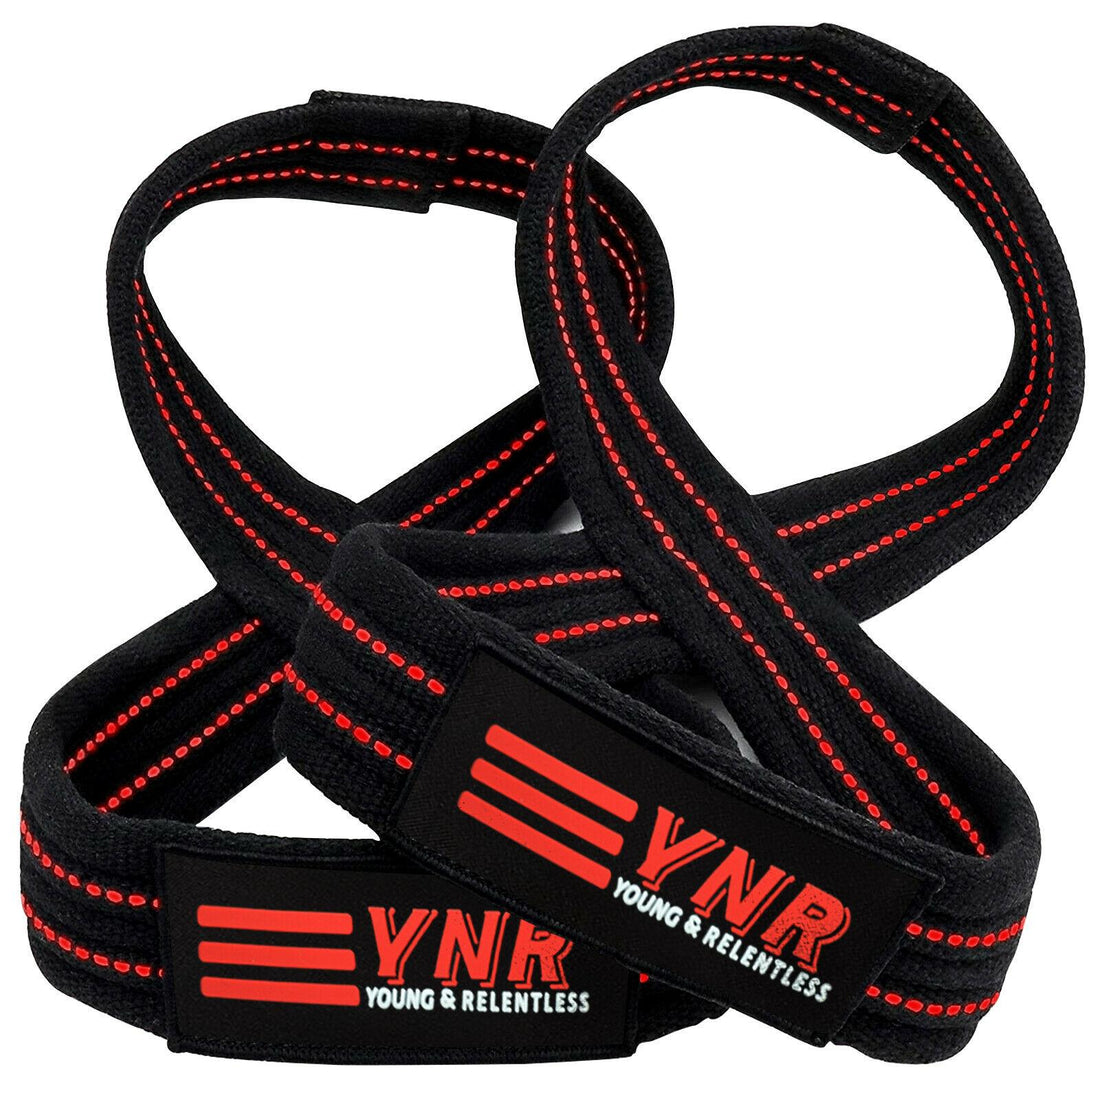 YNR® Figure eight 8 Padded Cuff Weight Lifting Wrist Strap Gym Double Workout